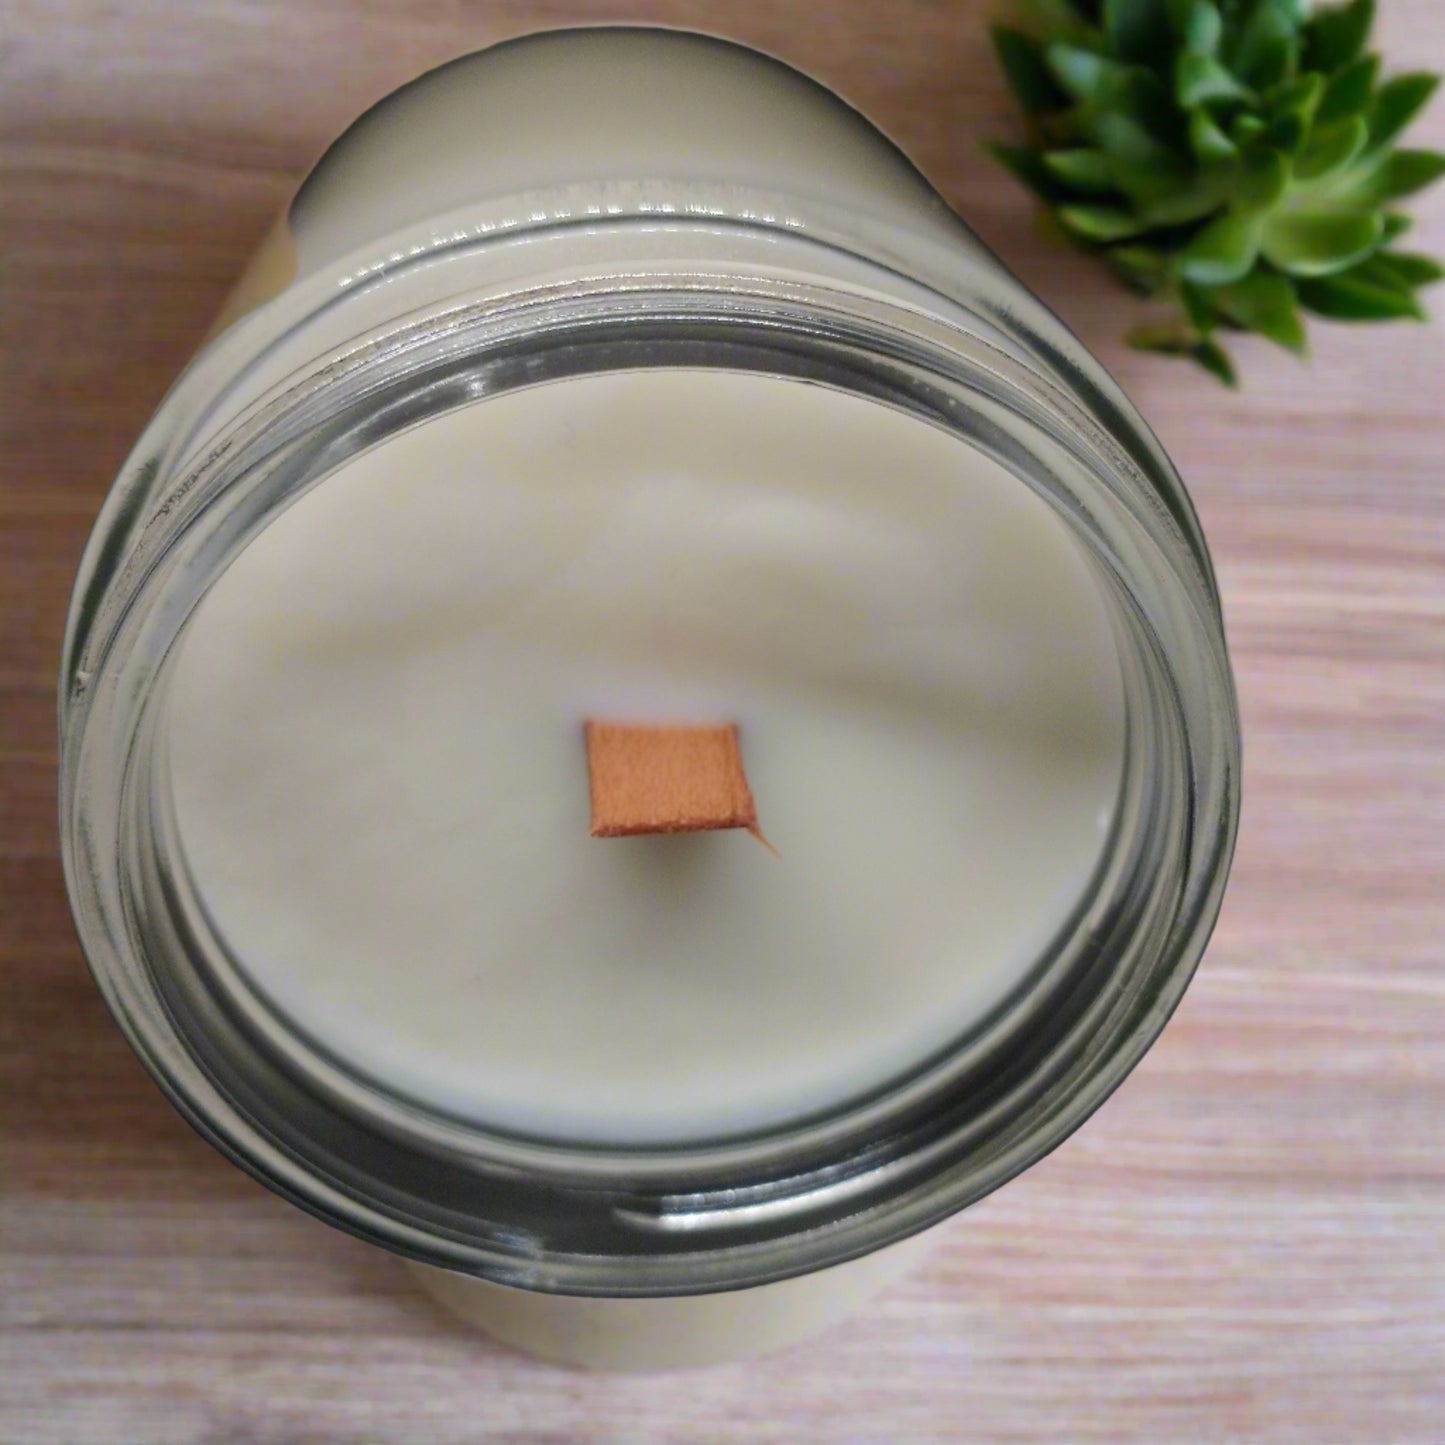 Abercrombie & Fitch Soy Wax Candle